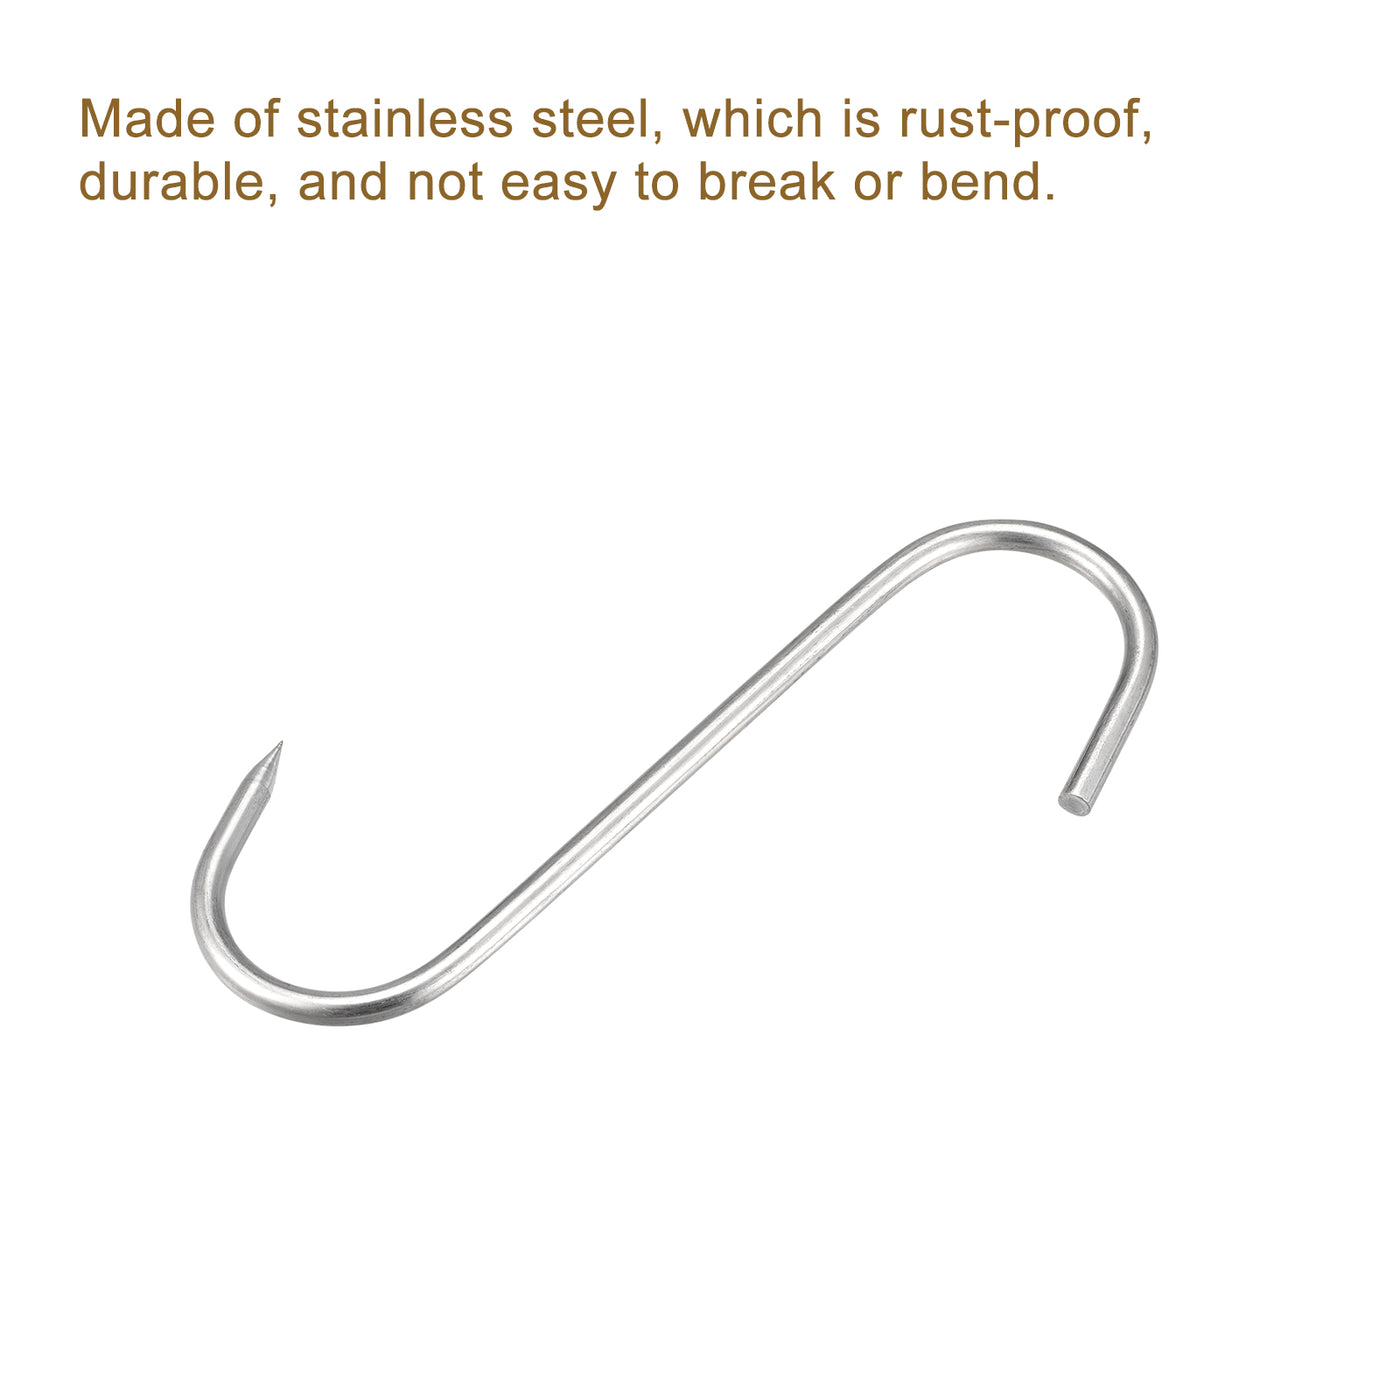 uxcell Uxcell 5.91" Meat Hooks, 0.24" Thick Stainless Steel S-Hook, Meat Processing for Chicken Fish Beef Hanging Drying Smoking 1Pcs